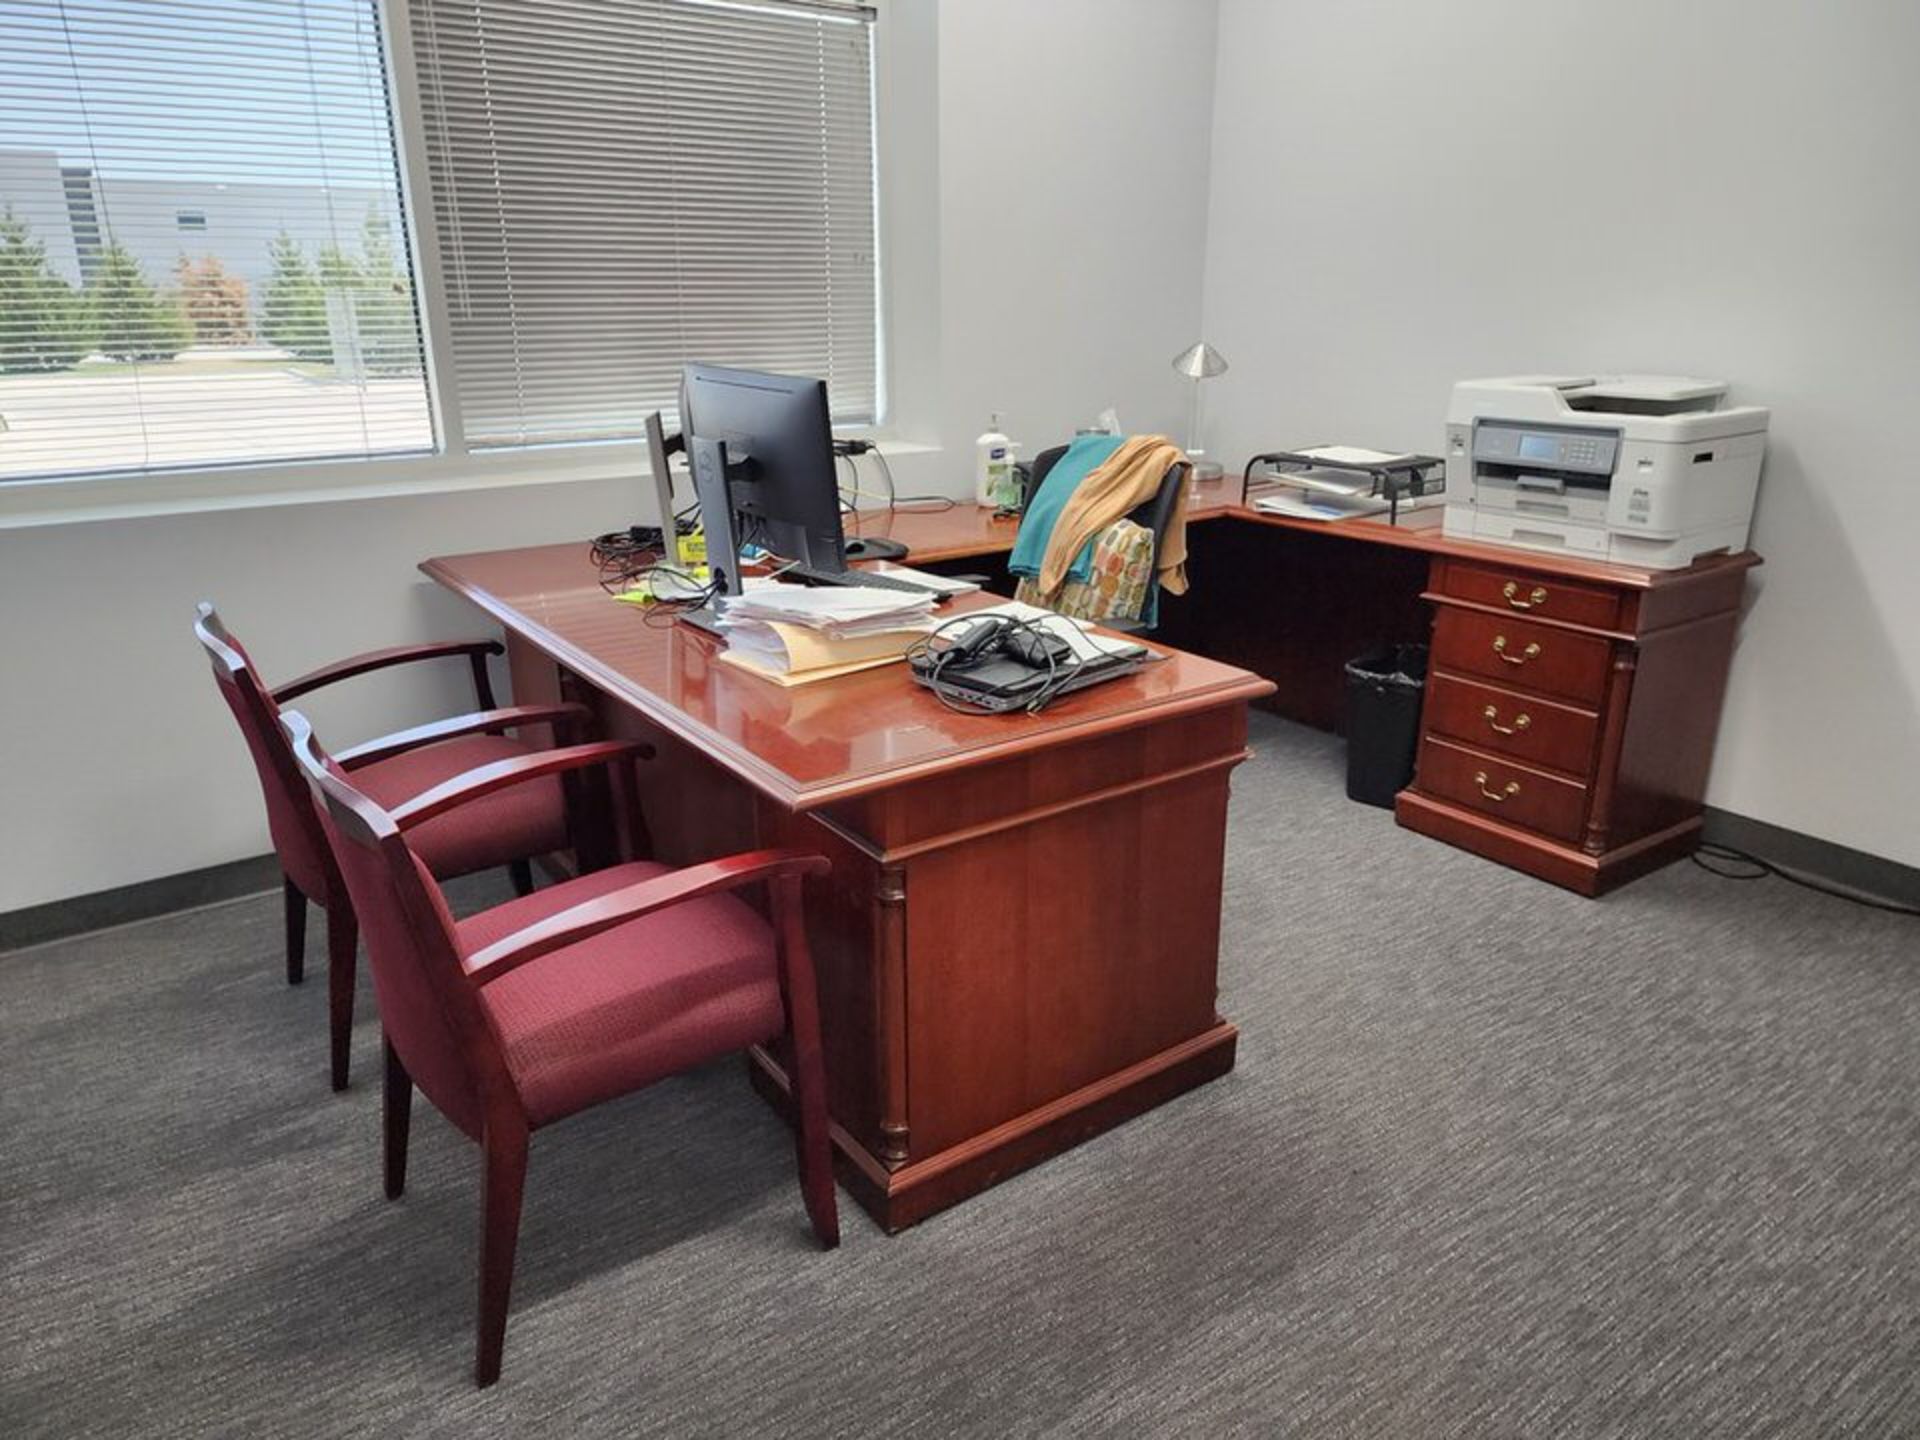 Office Furniture To Include But Not Limited To: Desk, Monitors, Keyboard & Mouse, etc. - Image 2 of 11